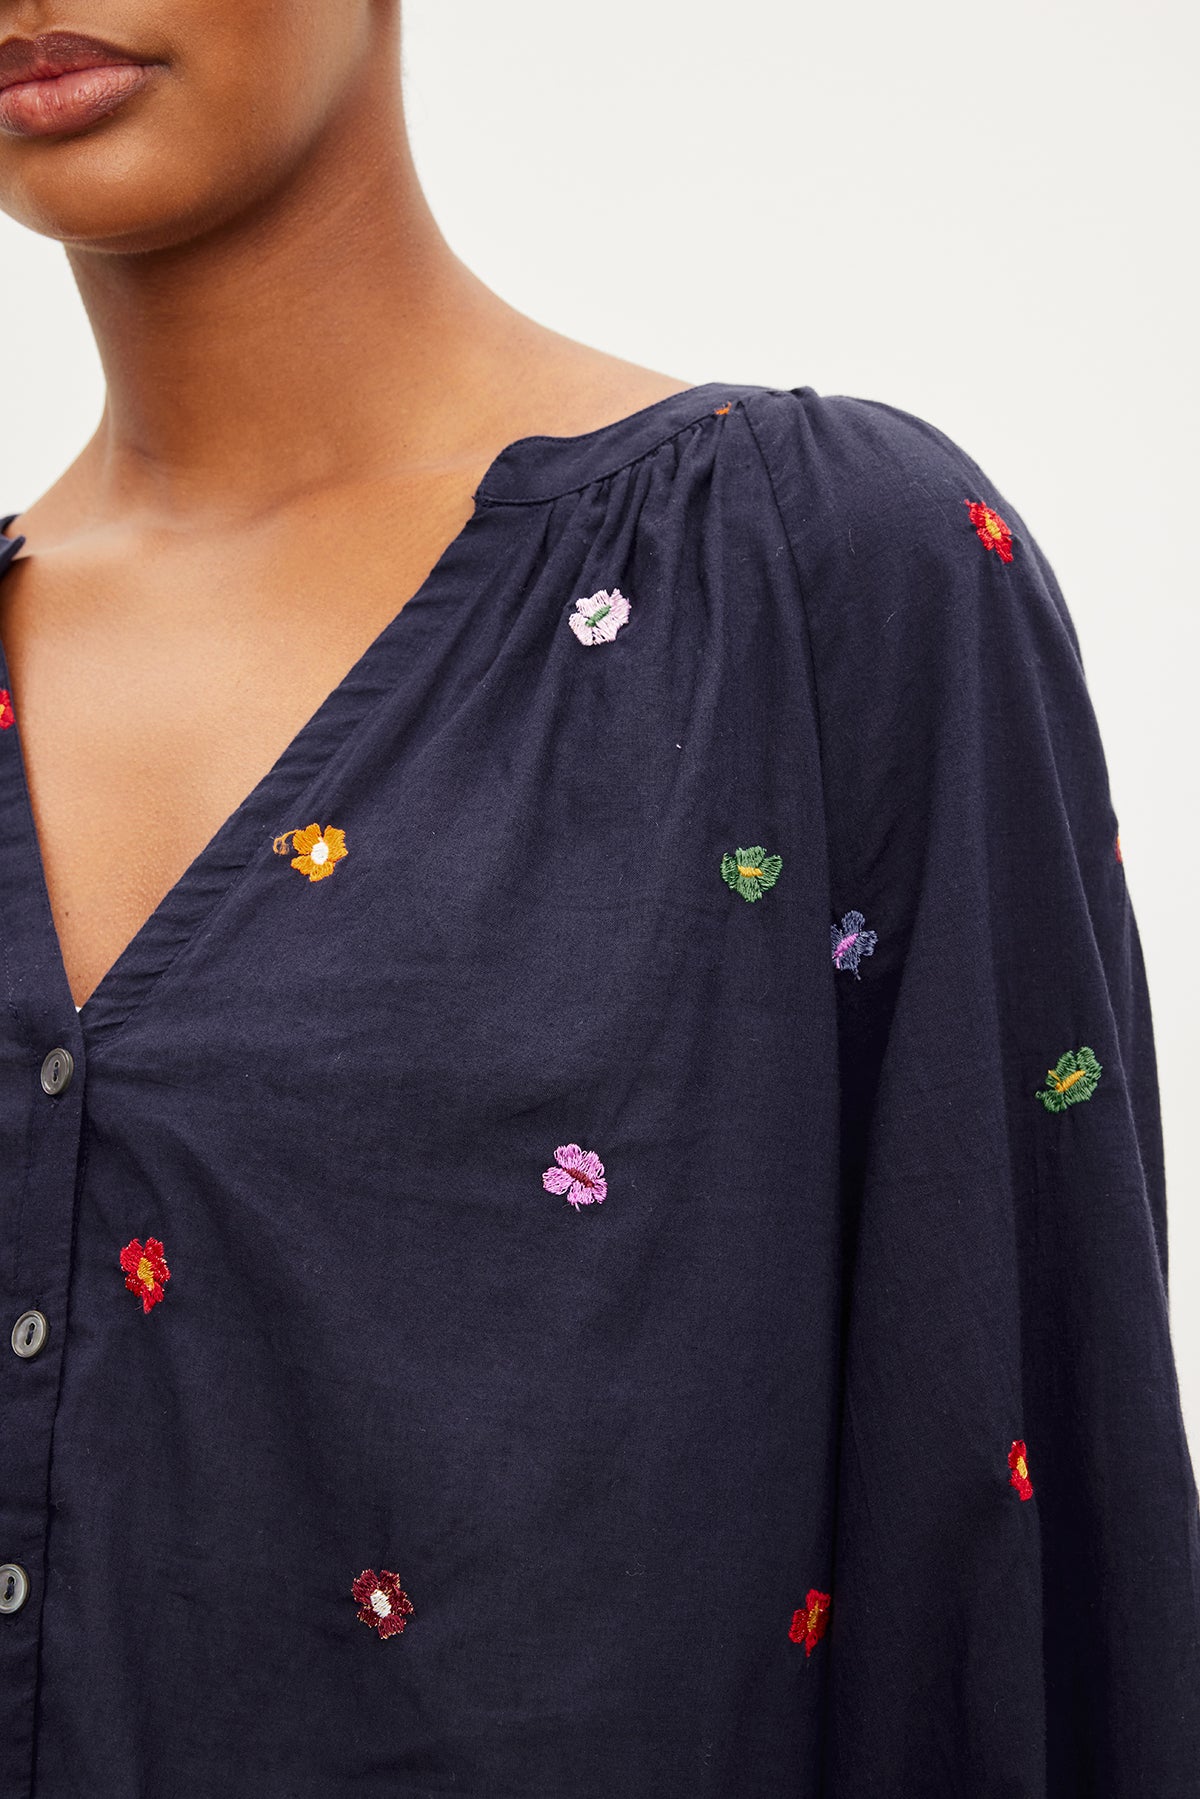 A woman wearing a navy ARETHA EMBROIDERED BOHO TOP by Velvet by Graham & Spencer with embroidered flowers.-35955411353793